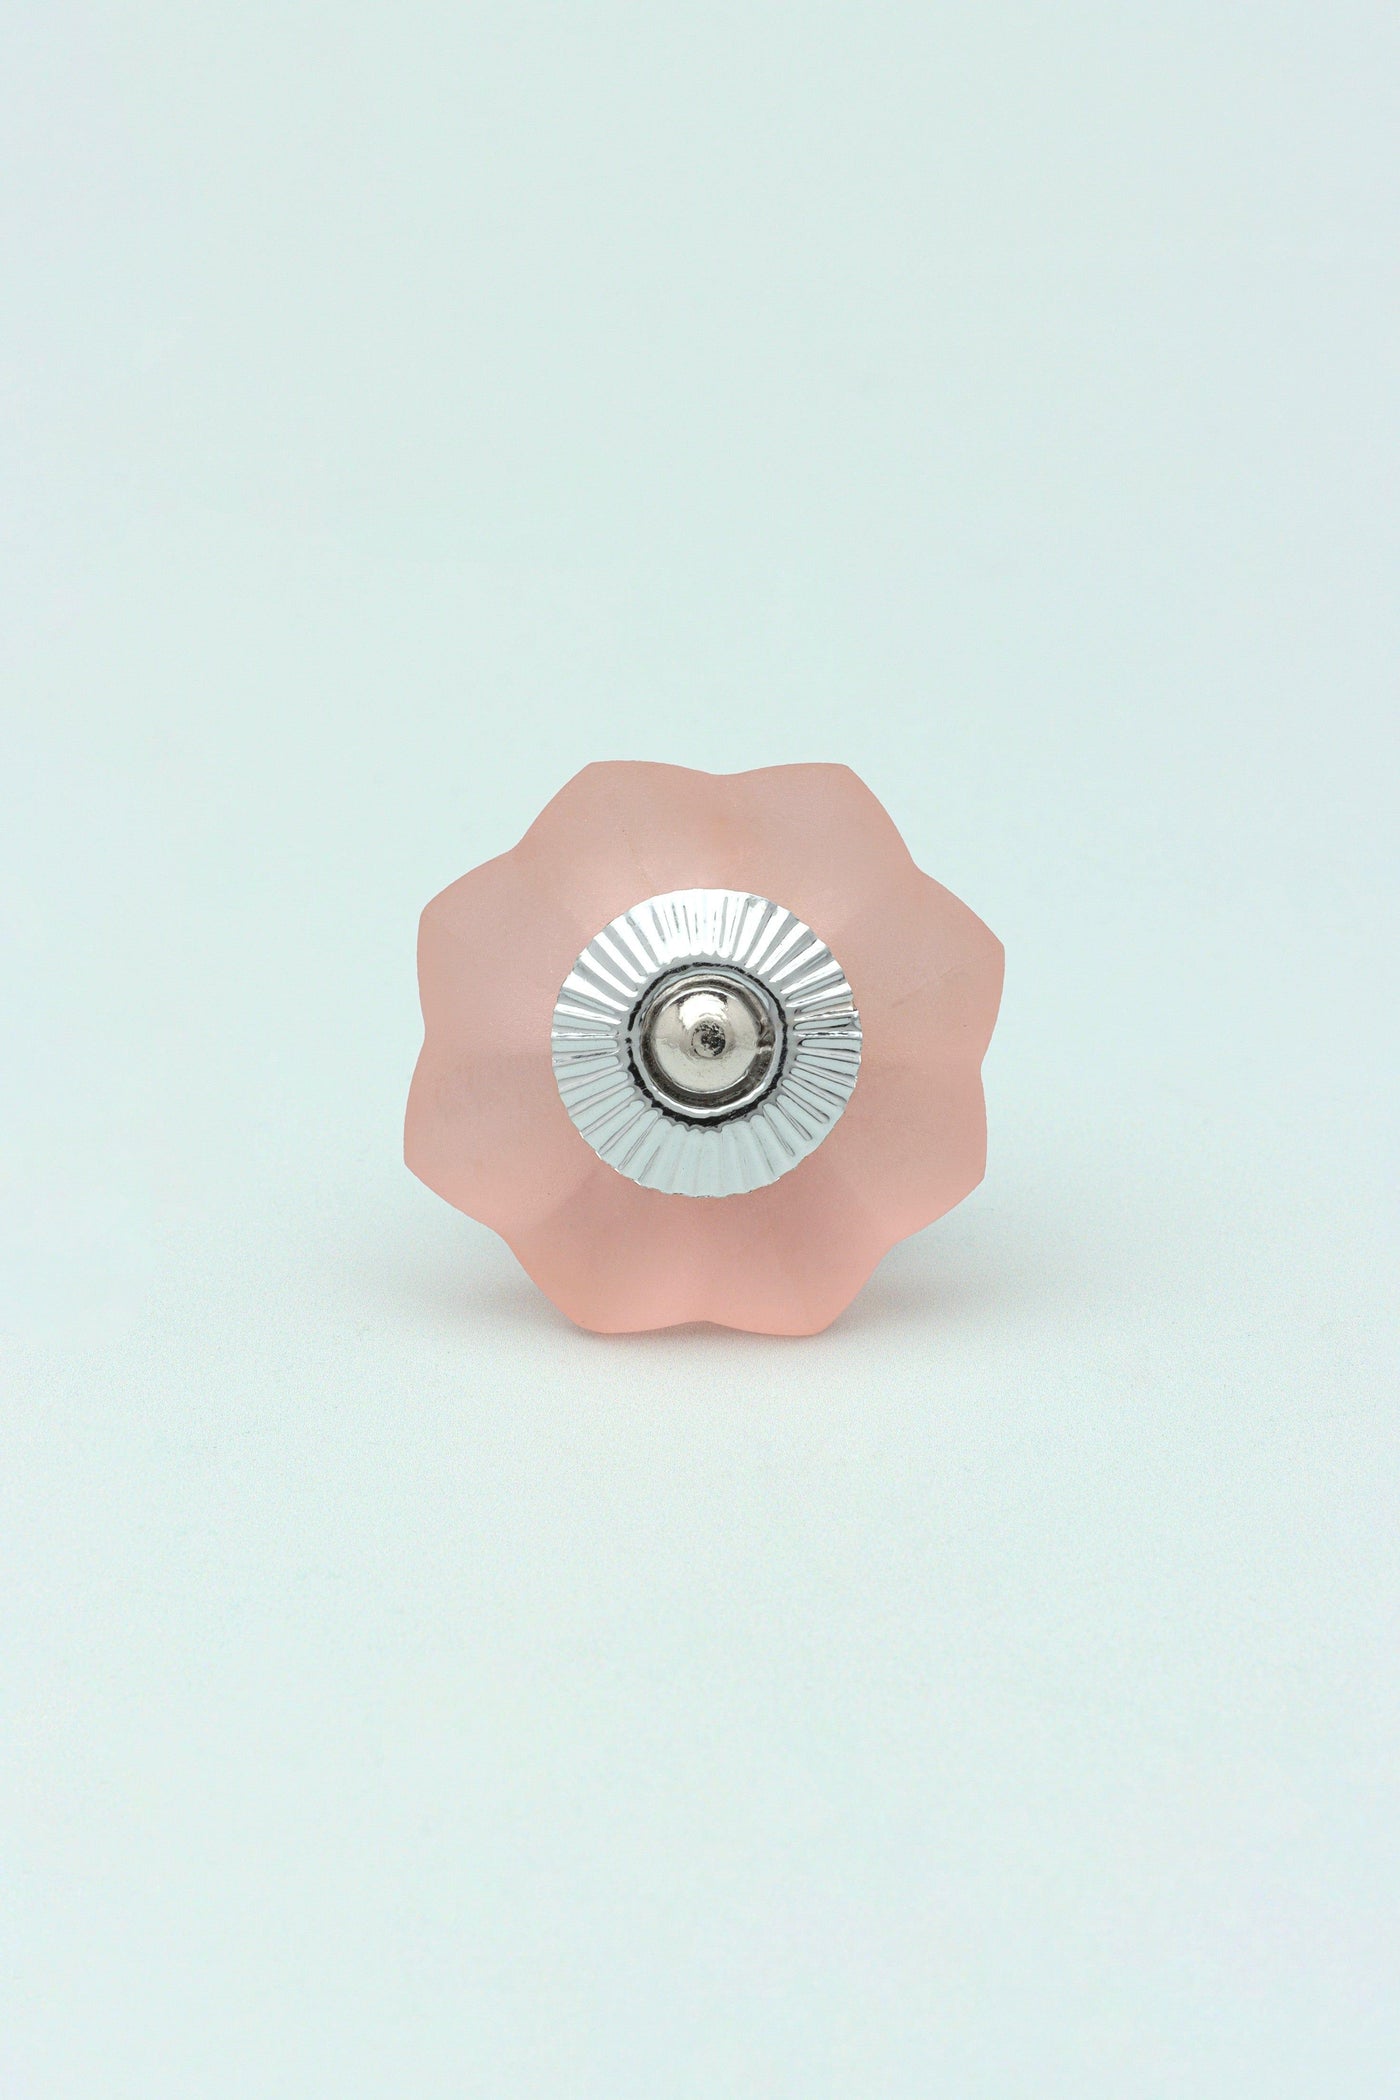 Gdecorstore Door Knobs & Handles Pink Fiero Flower Frosted Melon Glass Pull Knobs